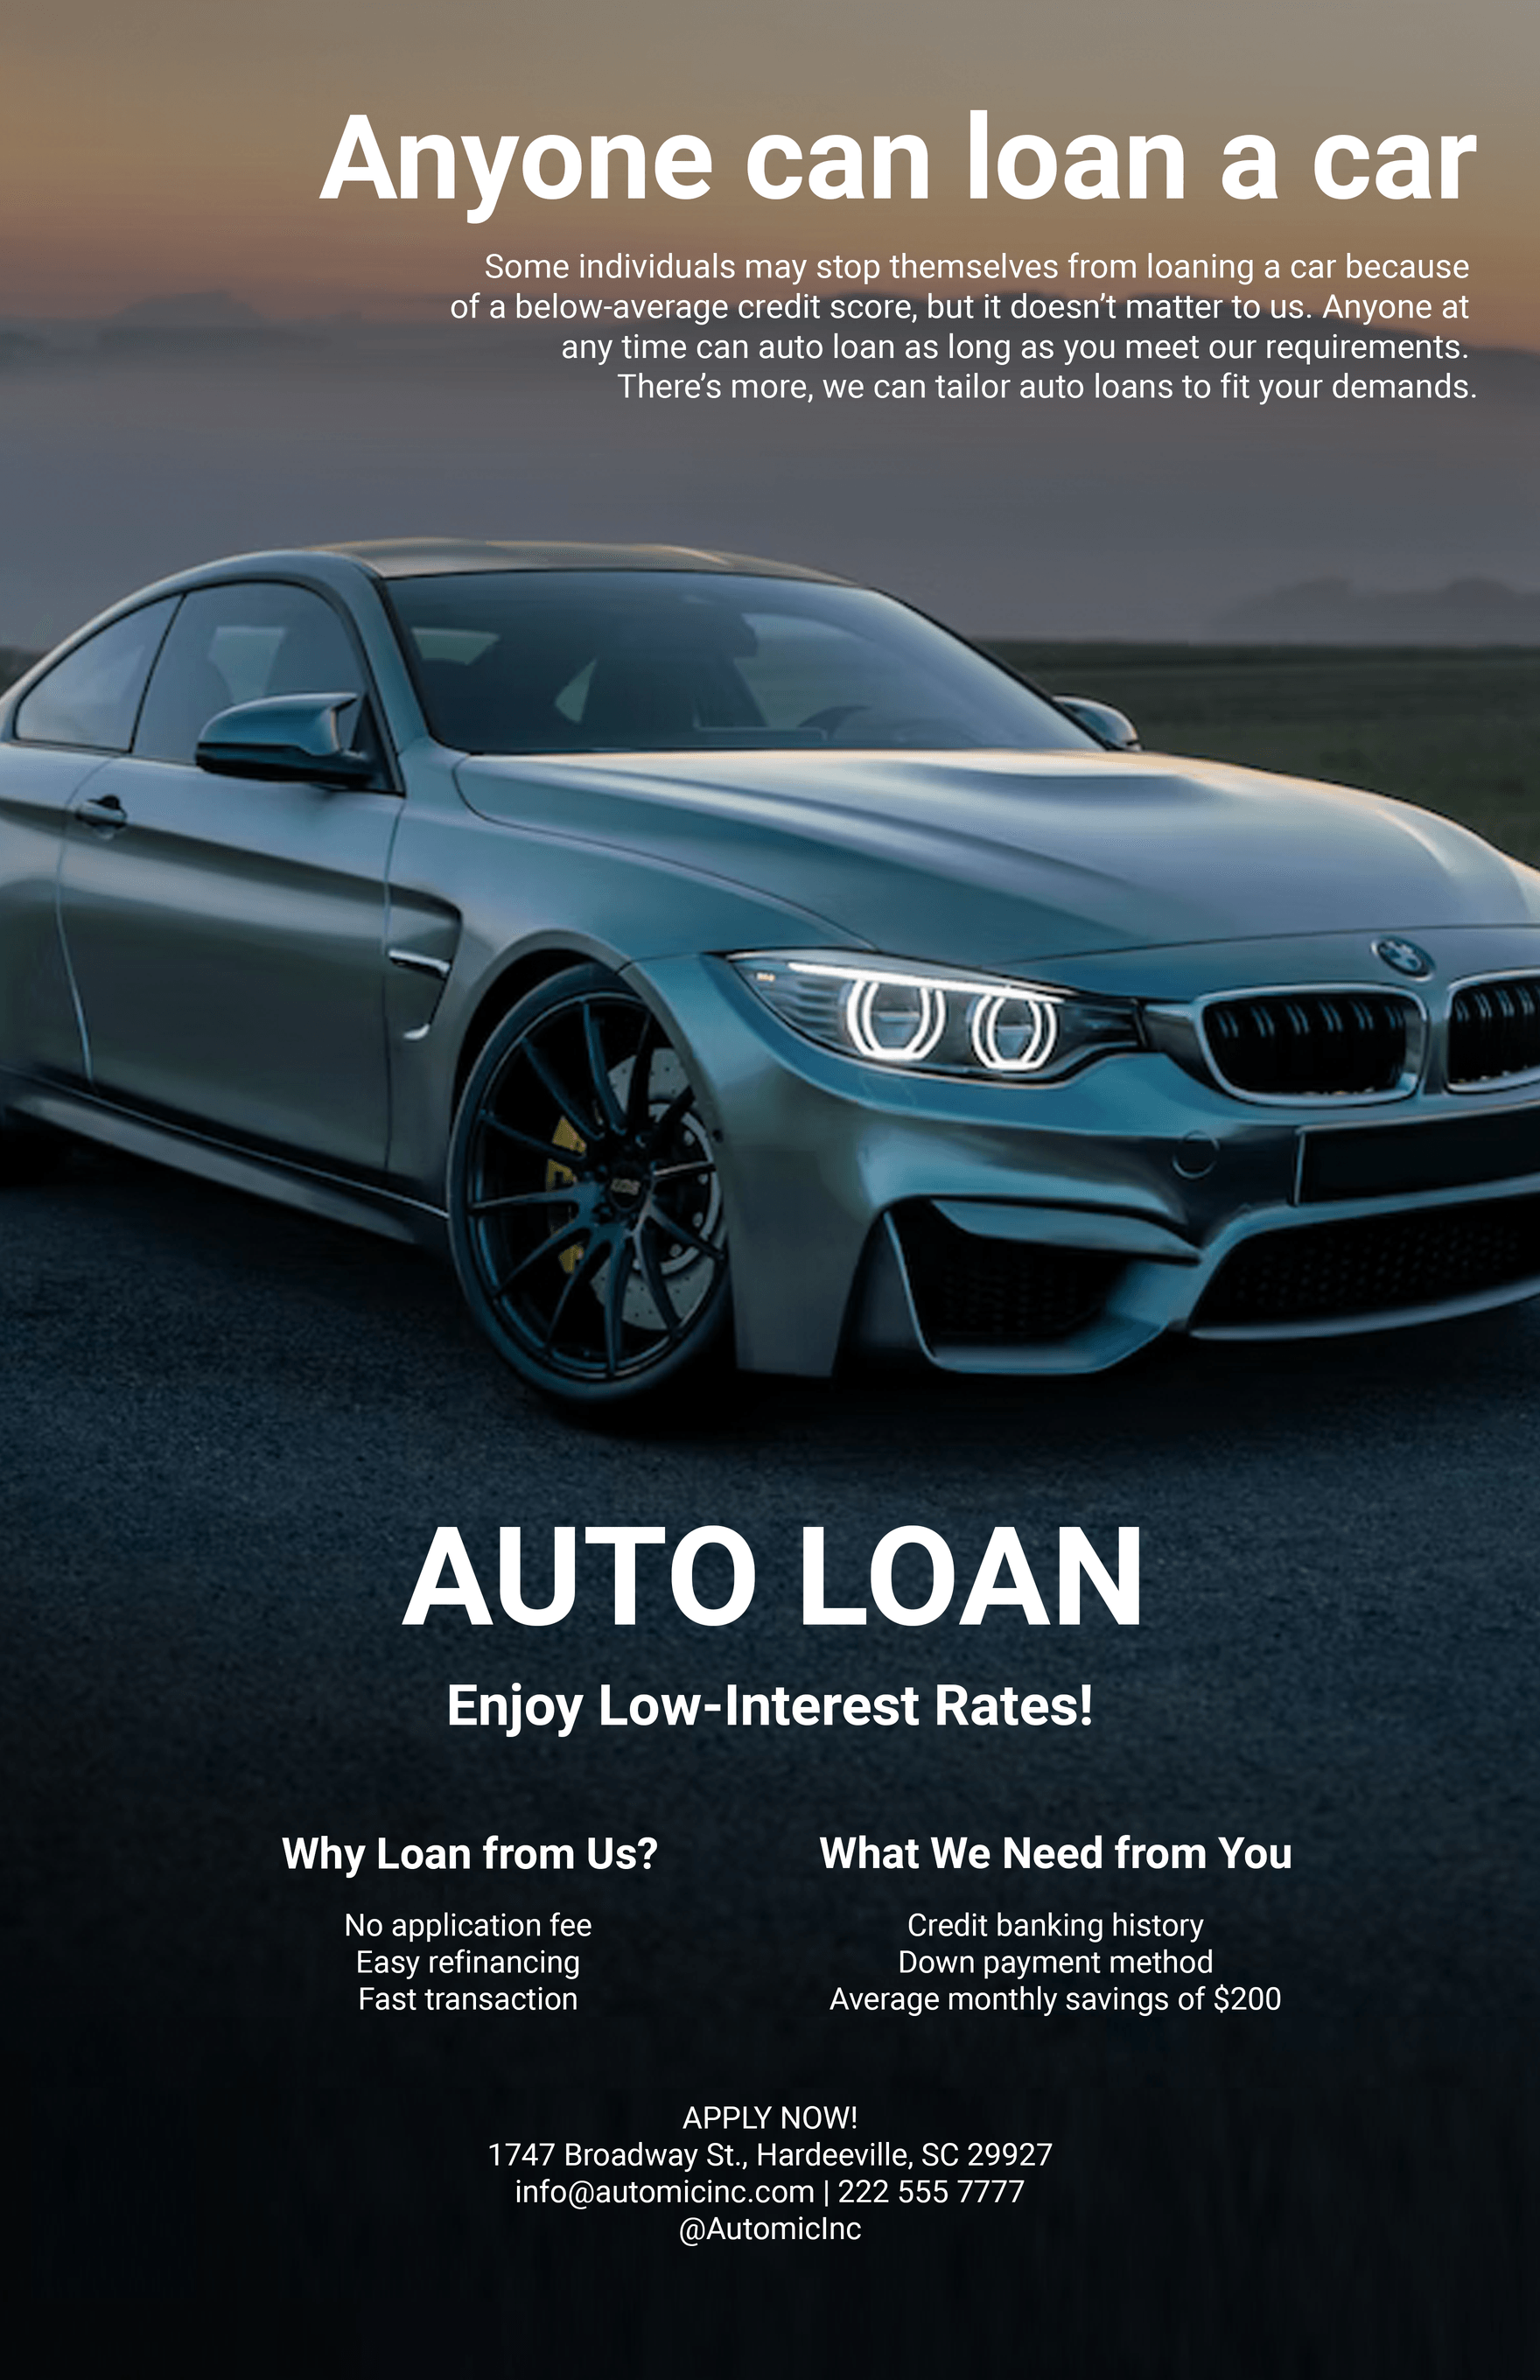 Auto Loan Product Sell Sheet Template